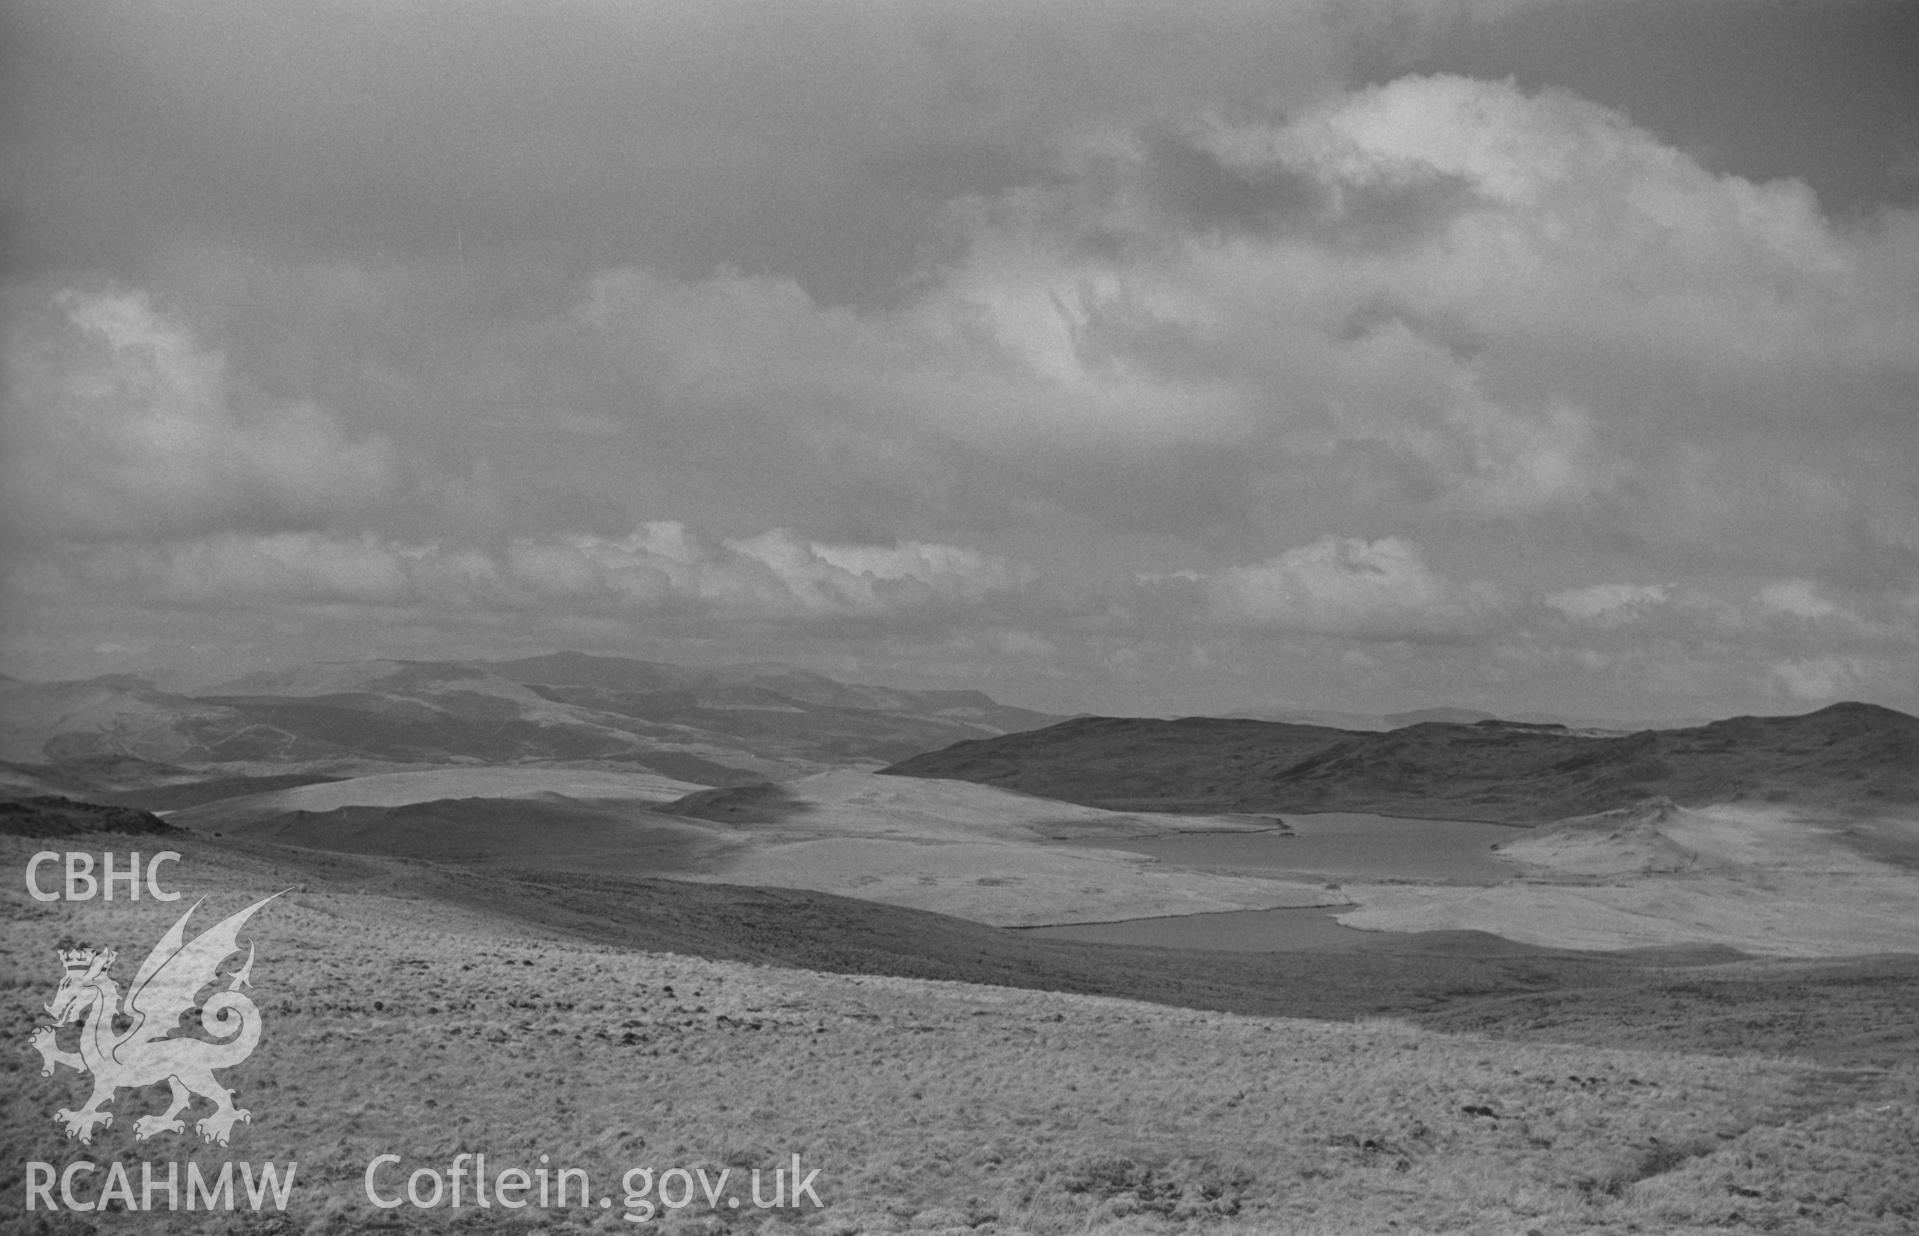 Black and White photograph showing New Pool and Anglers retreat from Bryn Melyn. Photographed by Arthur Chater in April 1962. Grid Reference: SN 741 922, looking east.